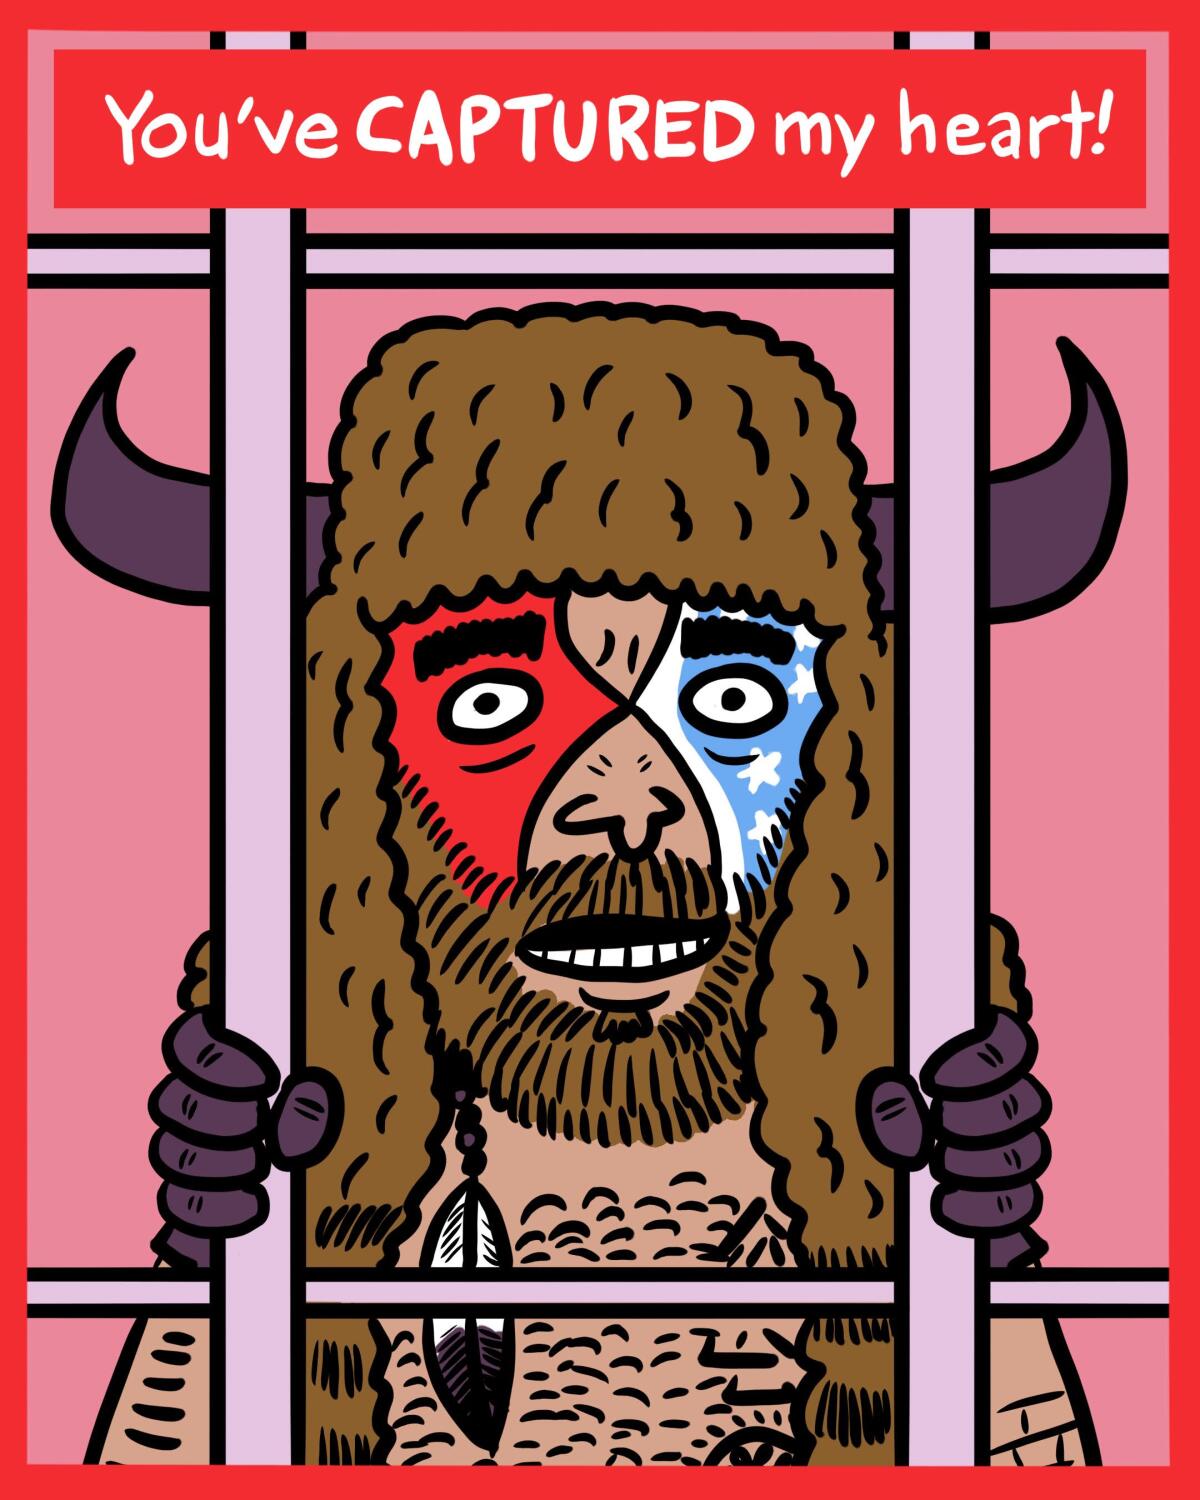 A Valentine's Day card with an illustration of a shirtless man behind bars wearing face paint and a hat with horns. 